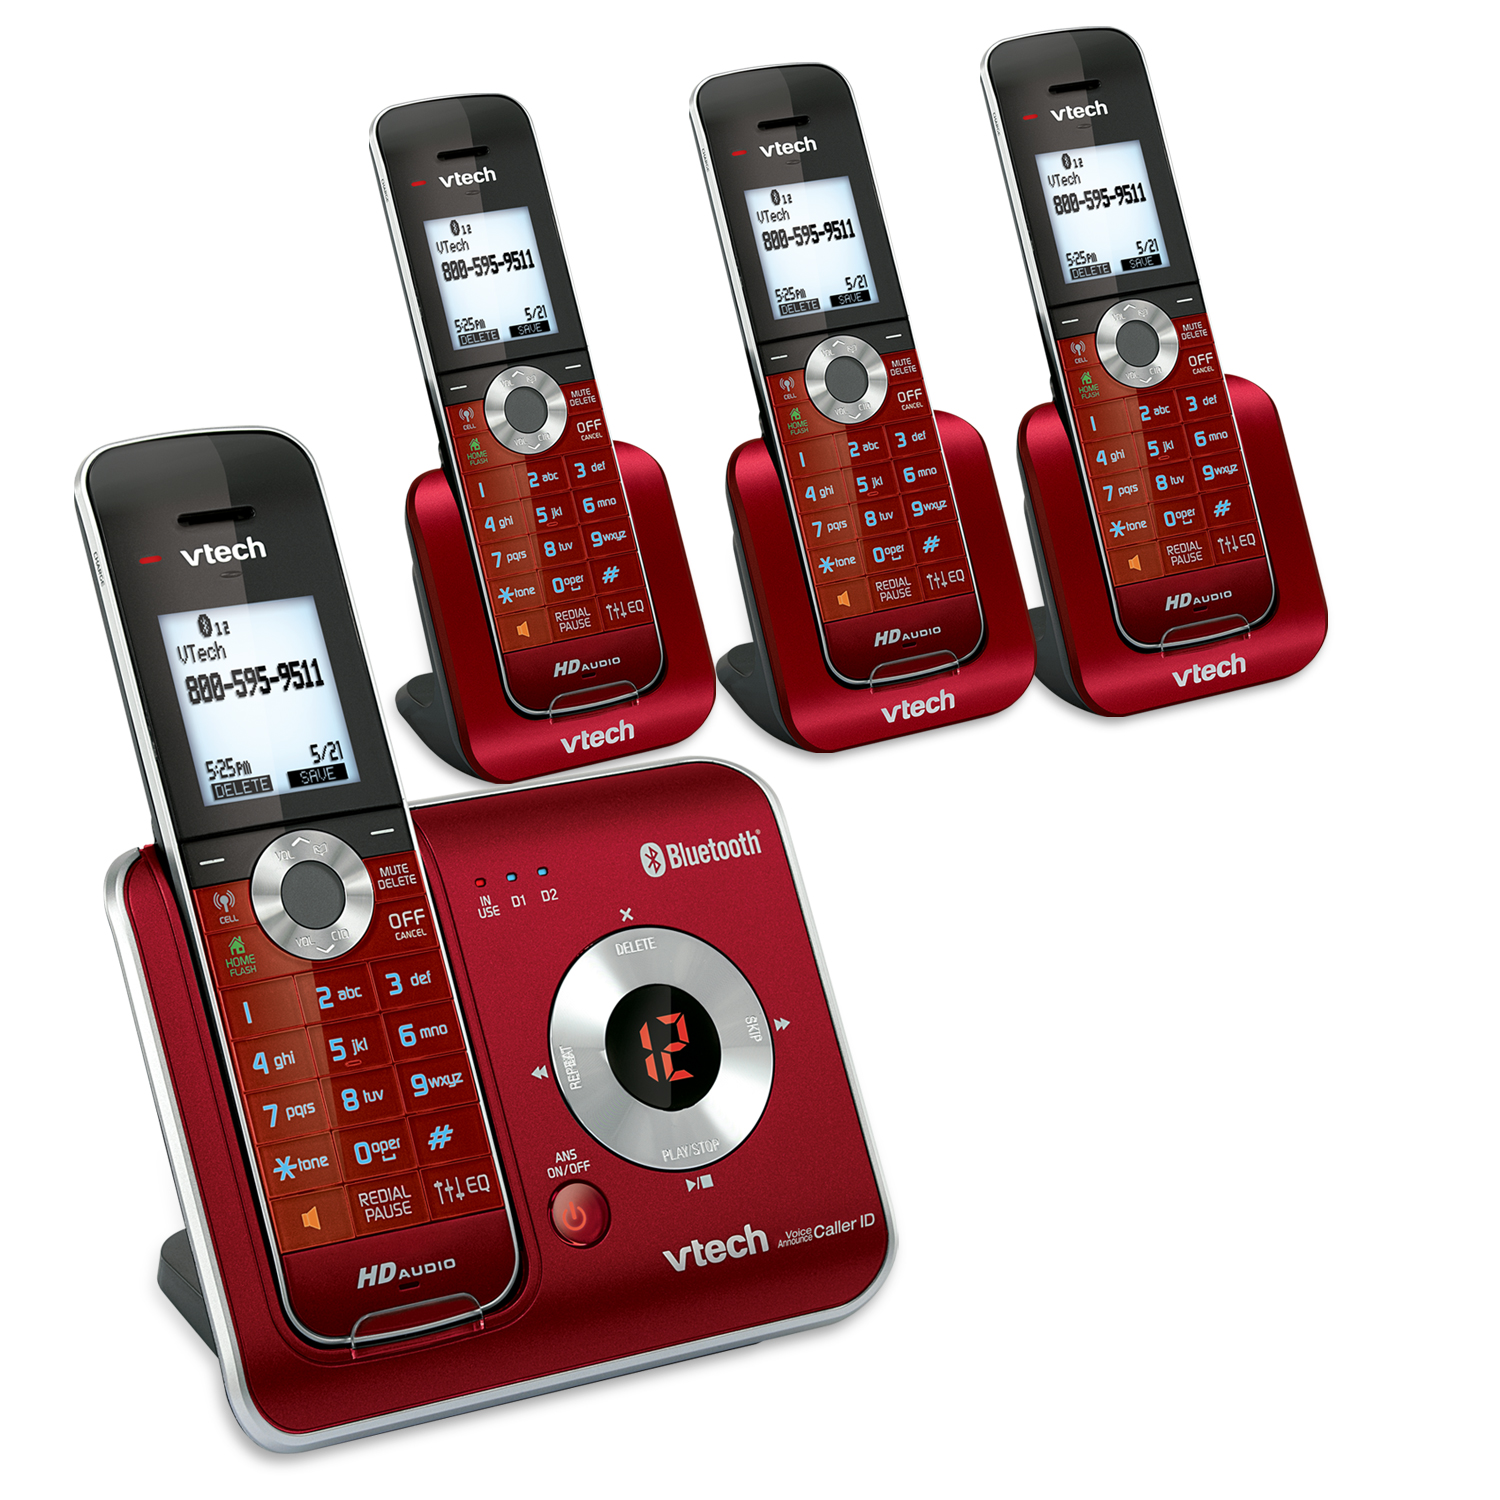 4 Handset Connect to Cell™ Answering System with Caller ID/Call Waiting - view 2